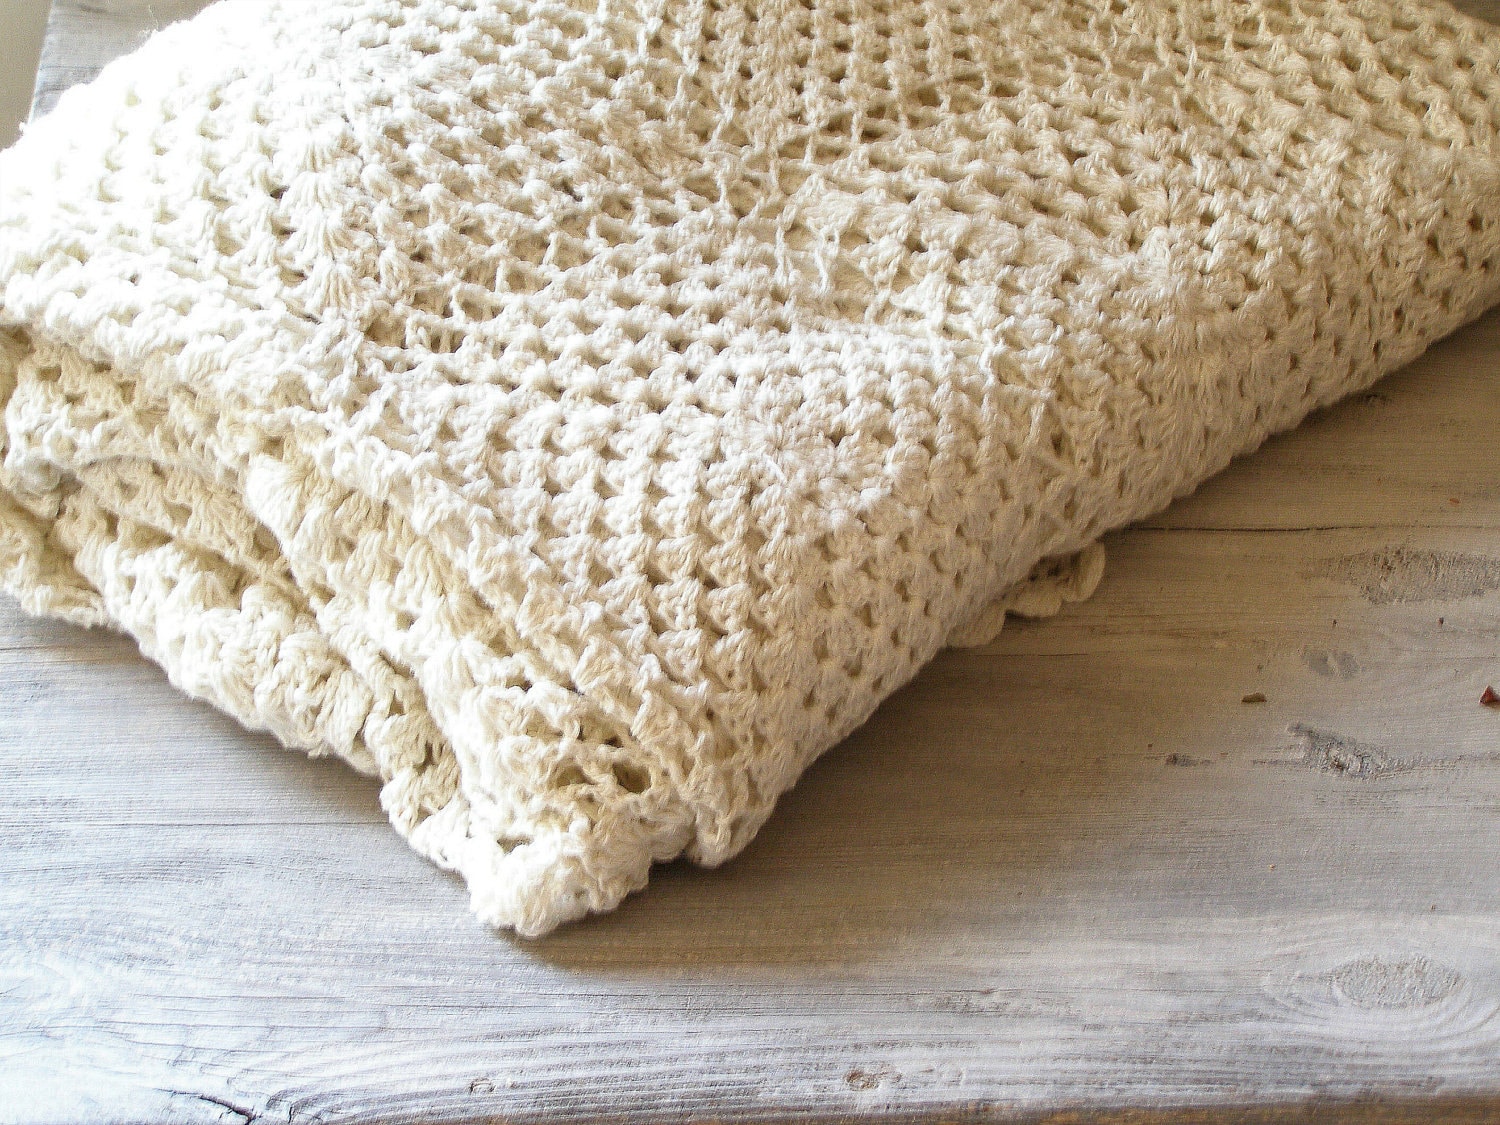 Crochet Bed Cover Shabby chic knitted bed cover by MeshuMaSH